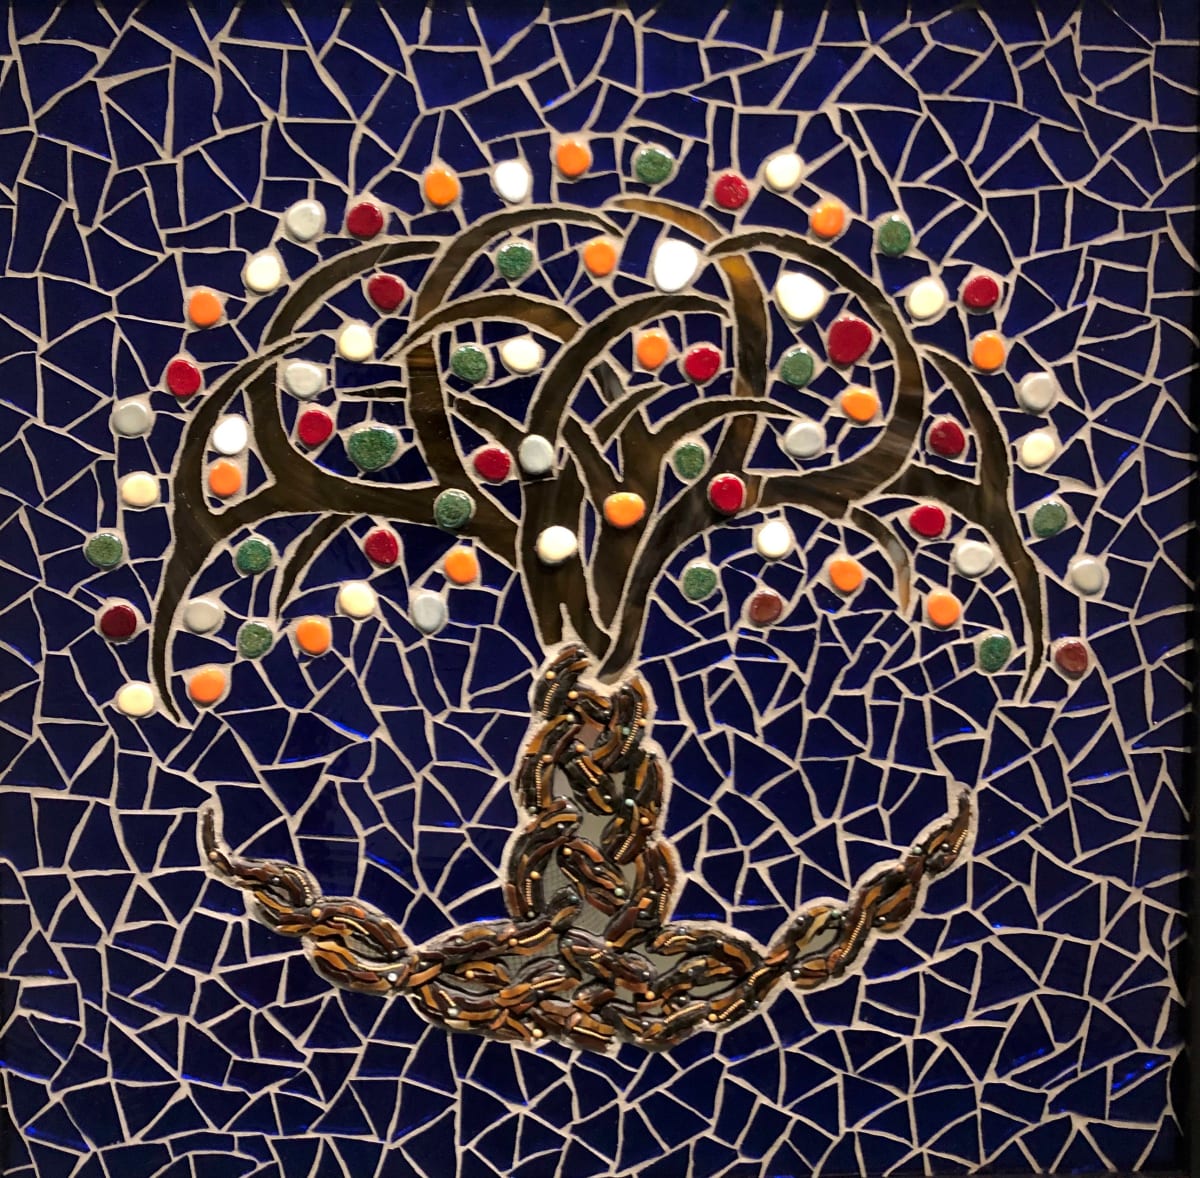 Tree of Life by Cindy Miller 